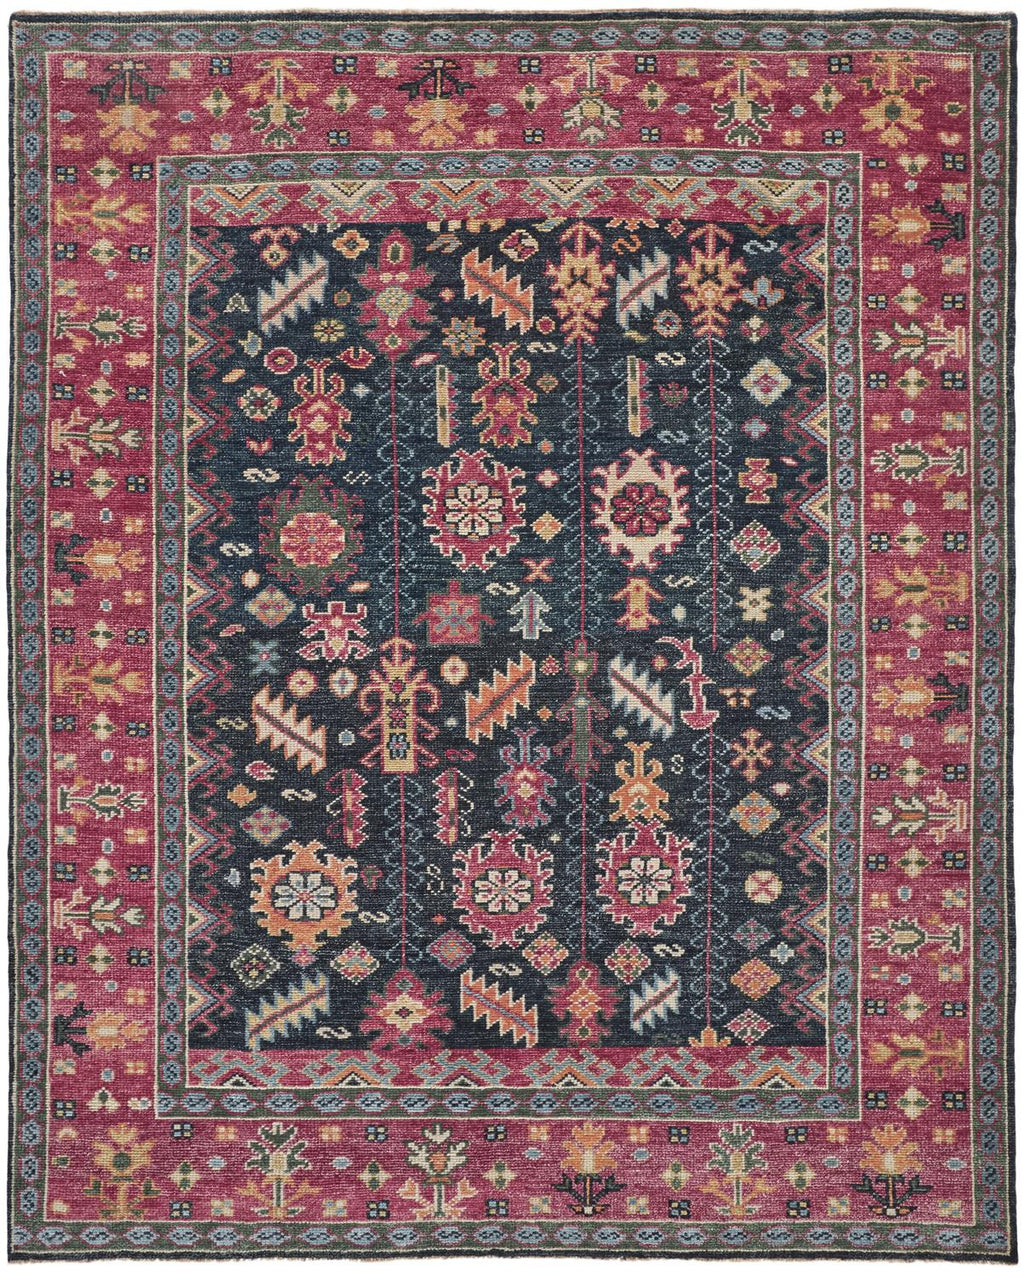 8' X 10' Pink Blue And Orange Wool Floral Hand Knotted Distressed Stain Resistant Area Rug With Fringe